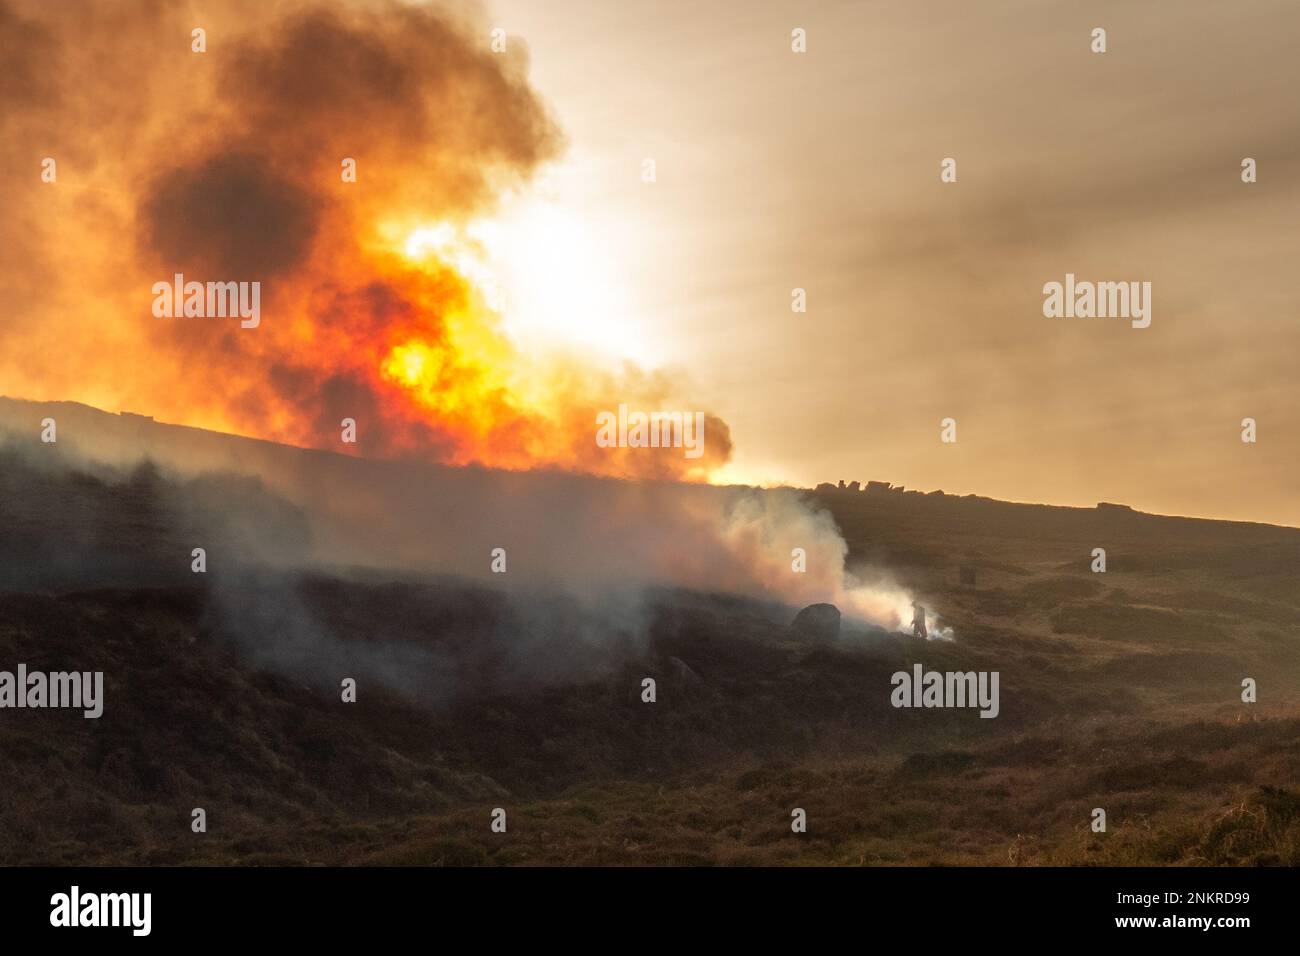 Controlled heather burning by a gamekeeper on Burley Moor in West Yorkshire with a gamekeeper standing in the smoke at sunset. England, UK Stock Photo